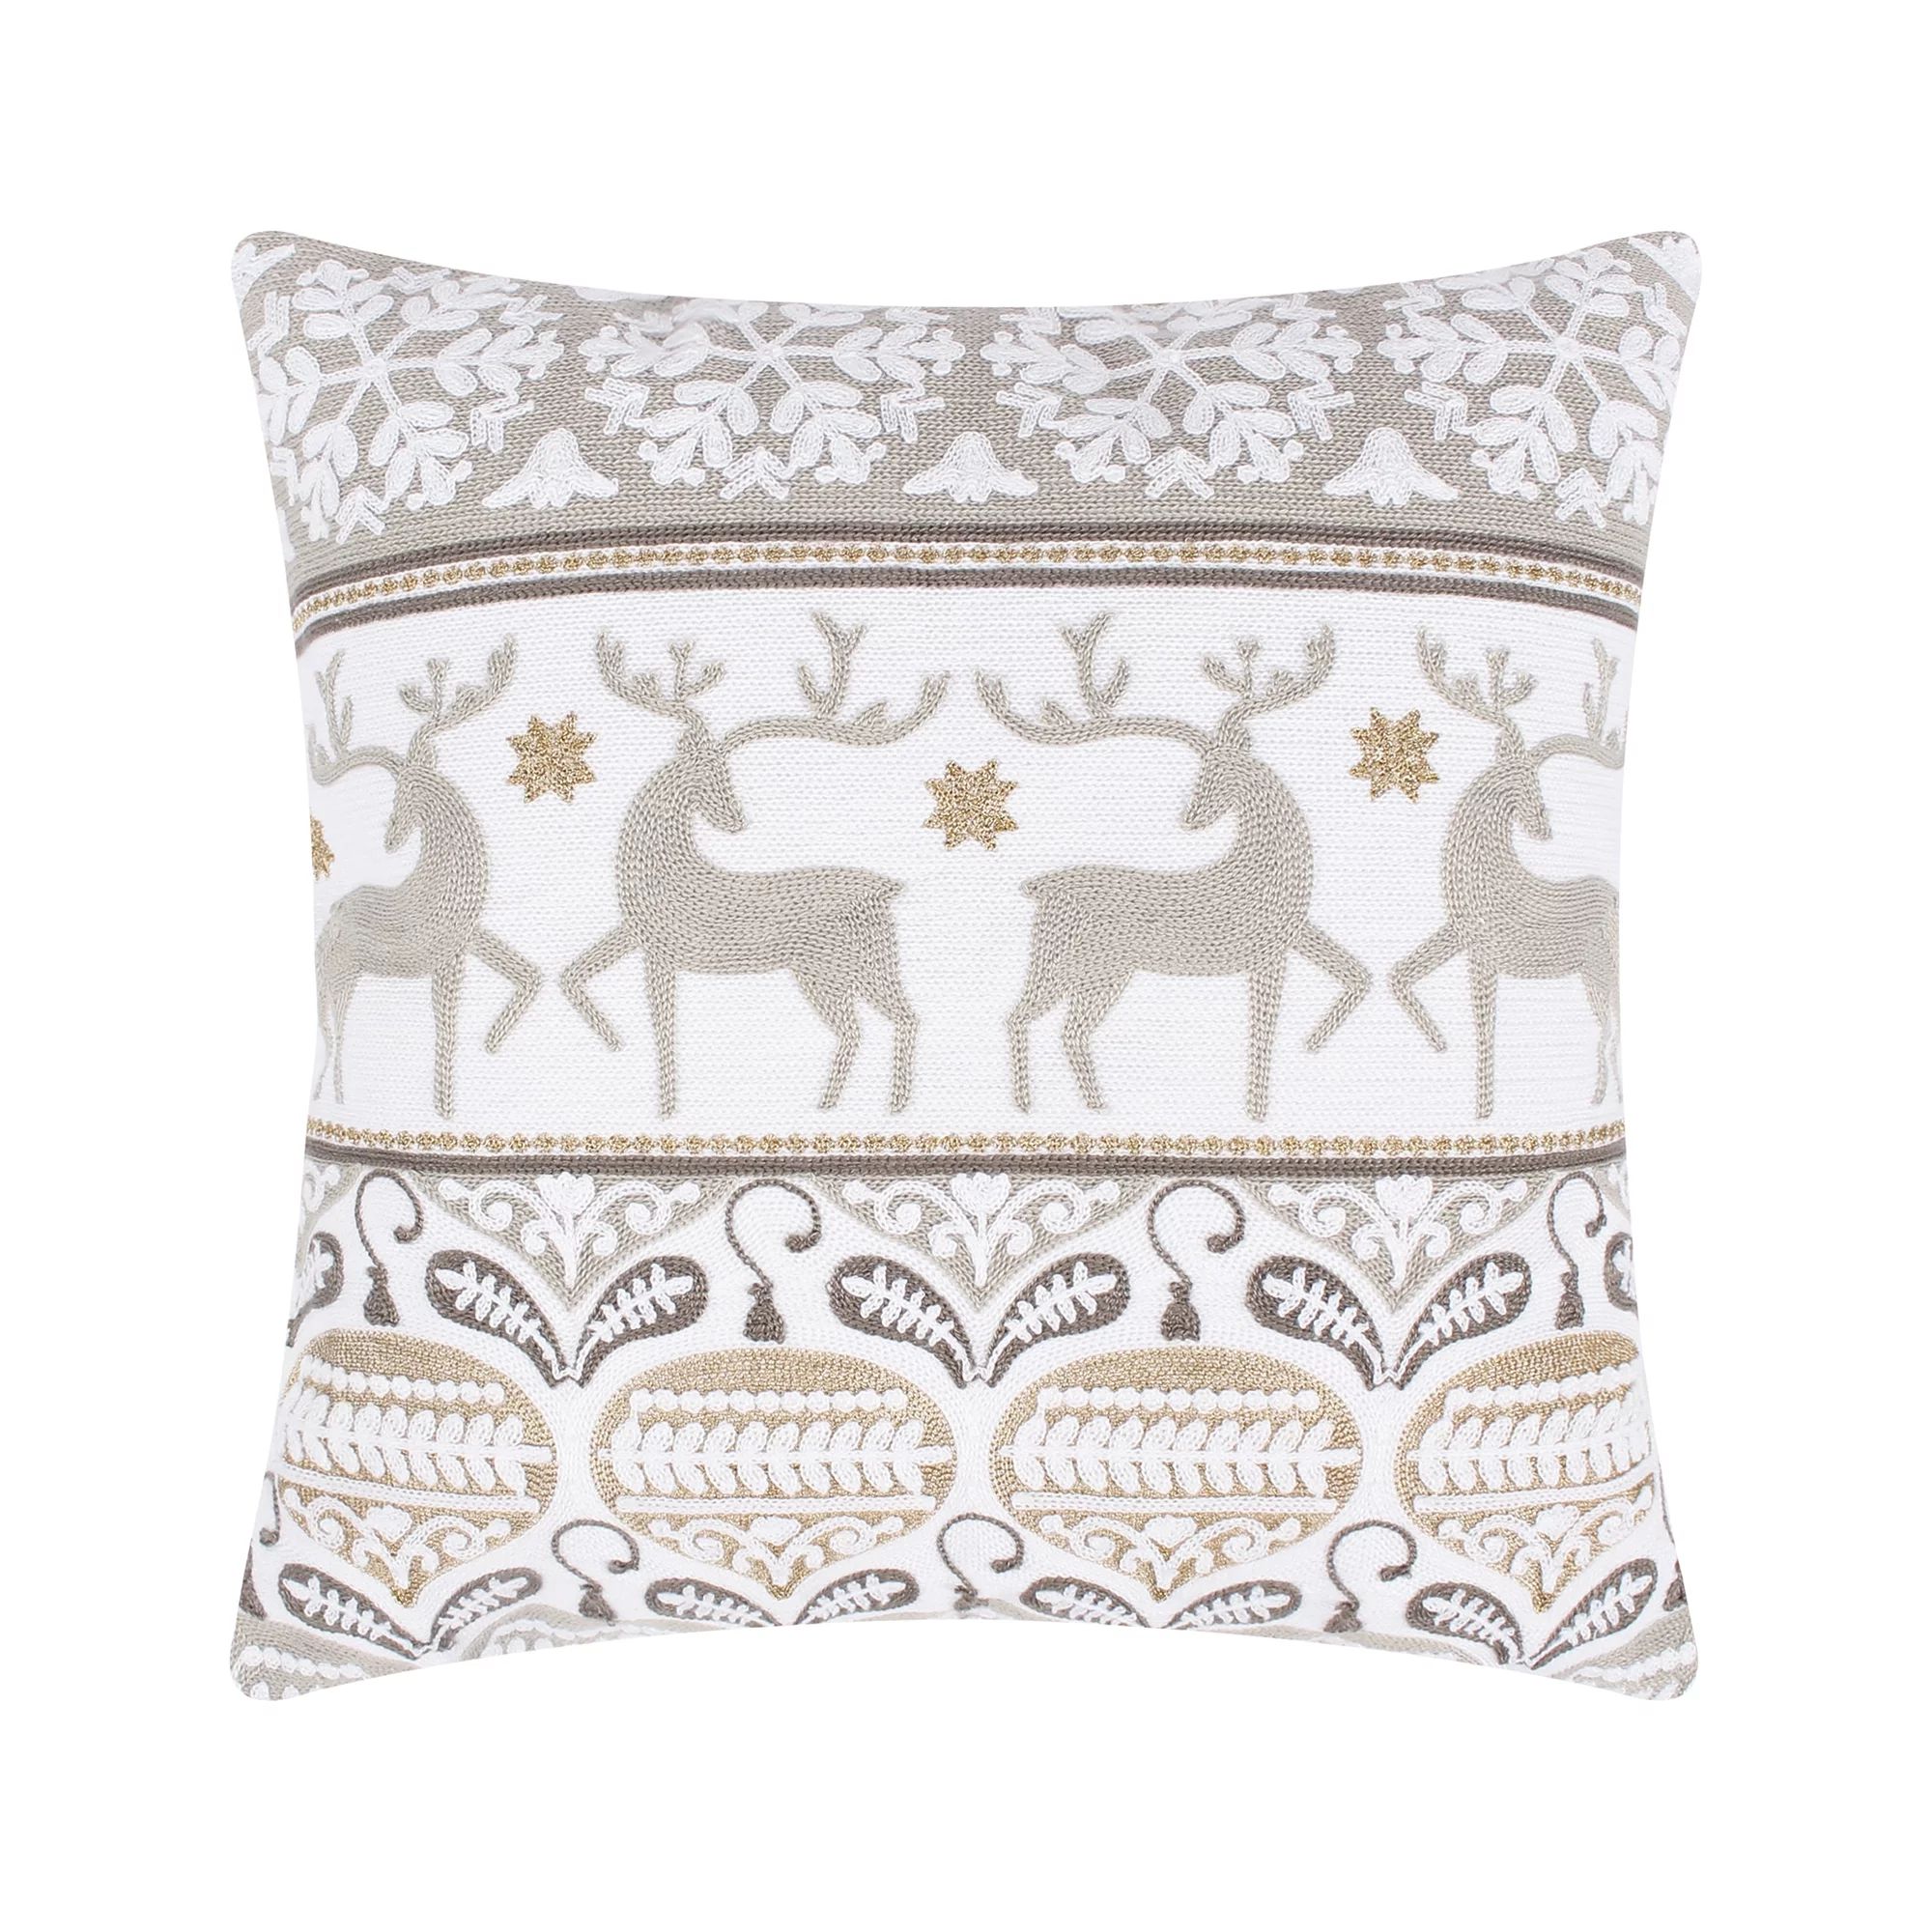 Levtex Home - O Christmas Tree - Decorative Pillow (18x18in.) - Reindeer - Taupe, Cream | Walmart (US)